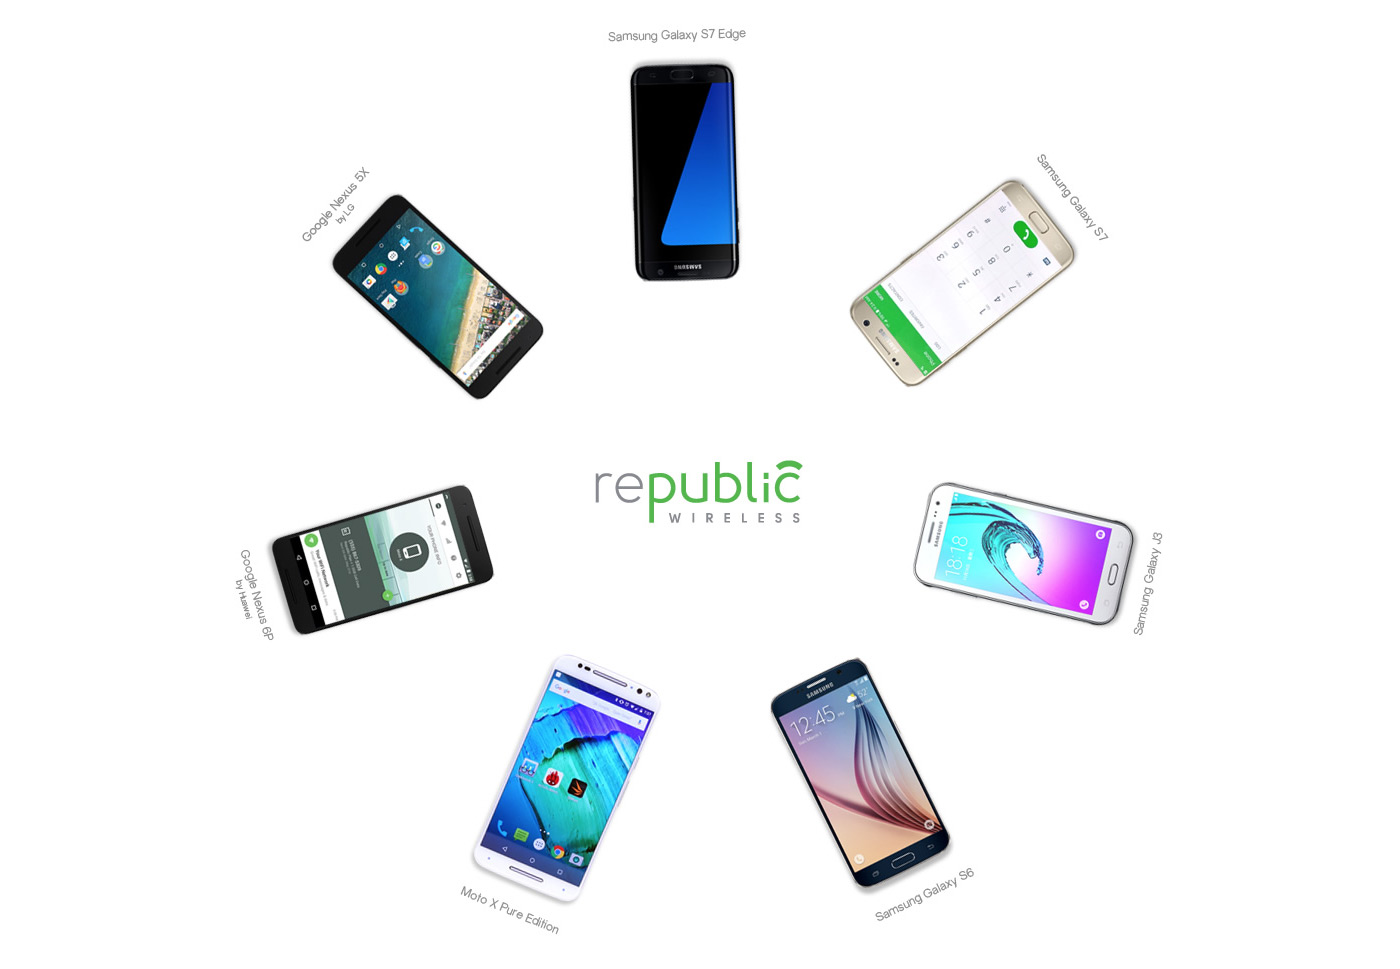 Republic Wireless gets serious about its phone selection